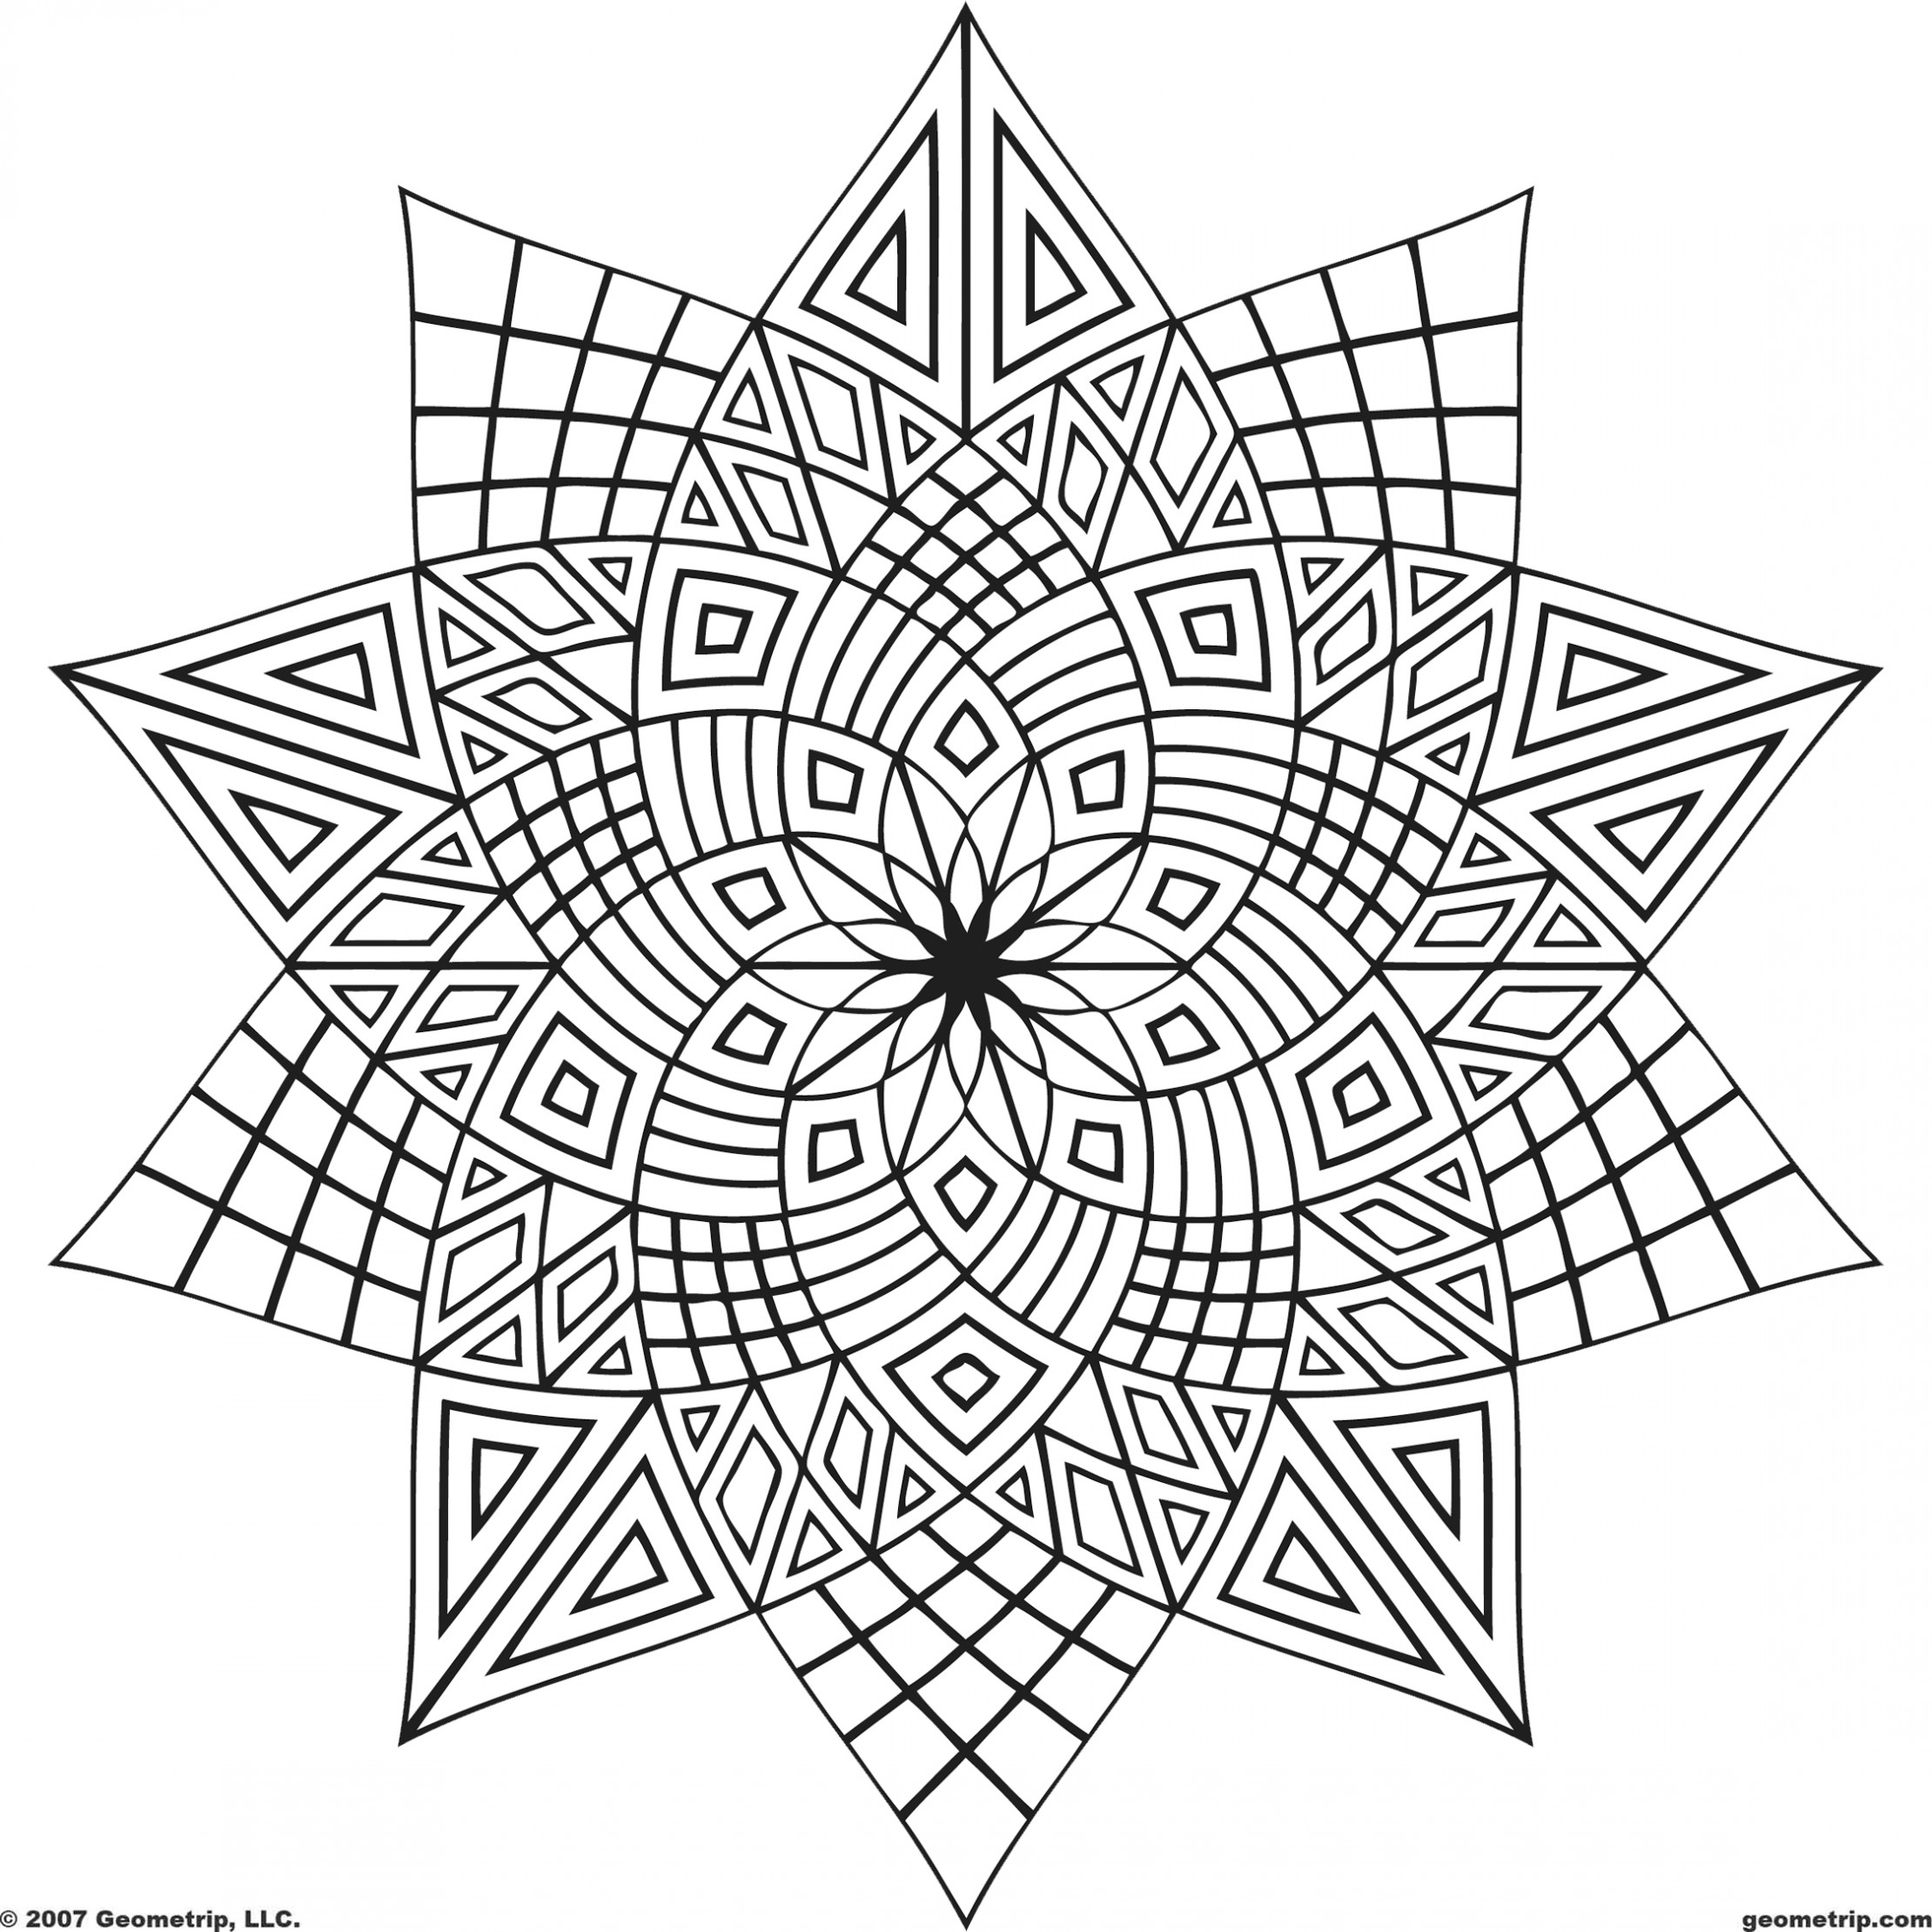  Free Coloring Pages For Adults – letscoloringpages.com – Star